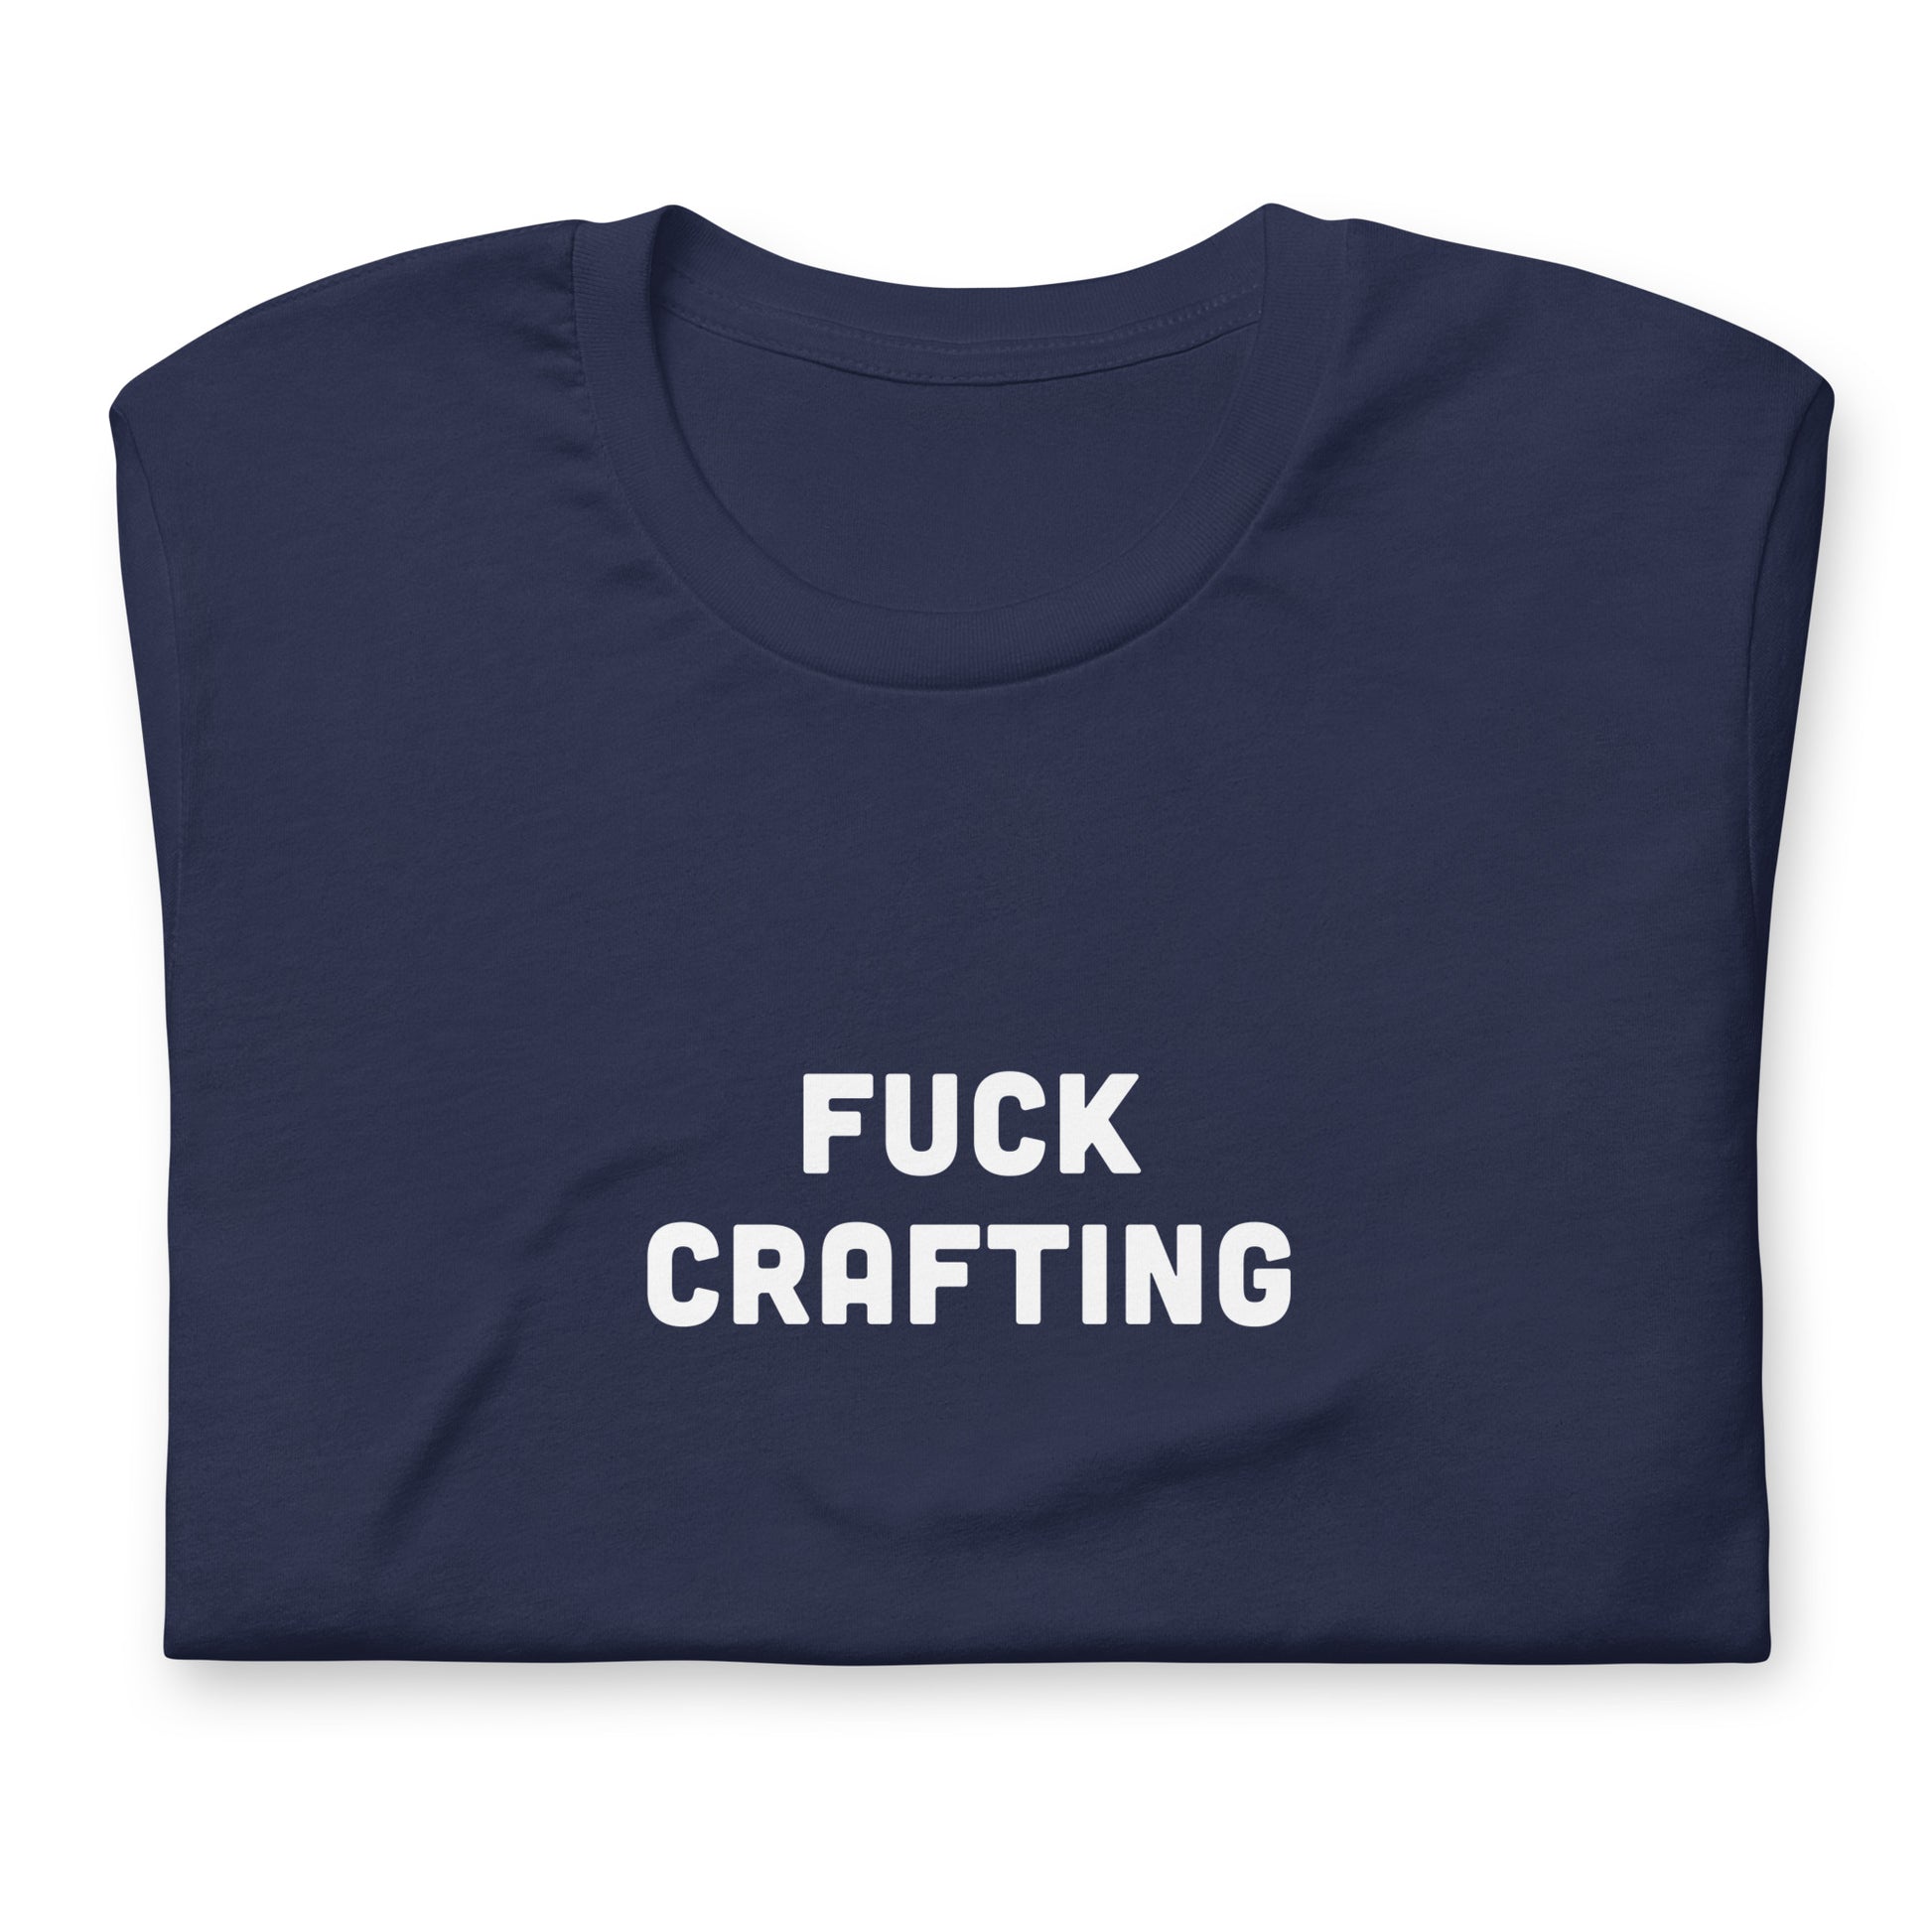 Fuck Crafting T-Shirt Size L Color Black